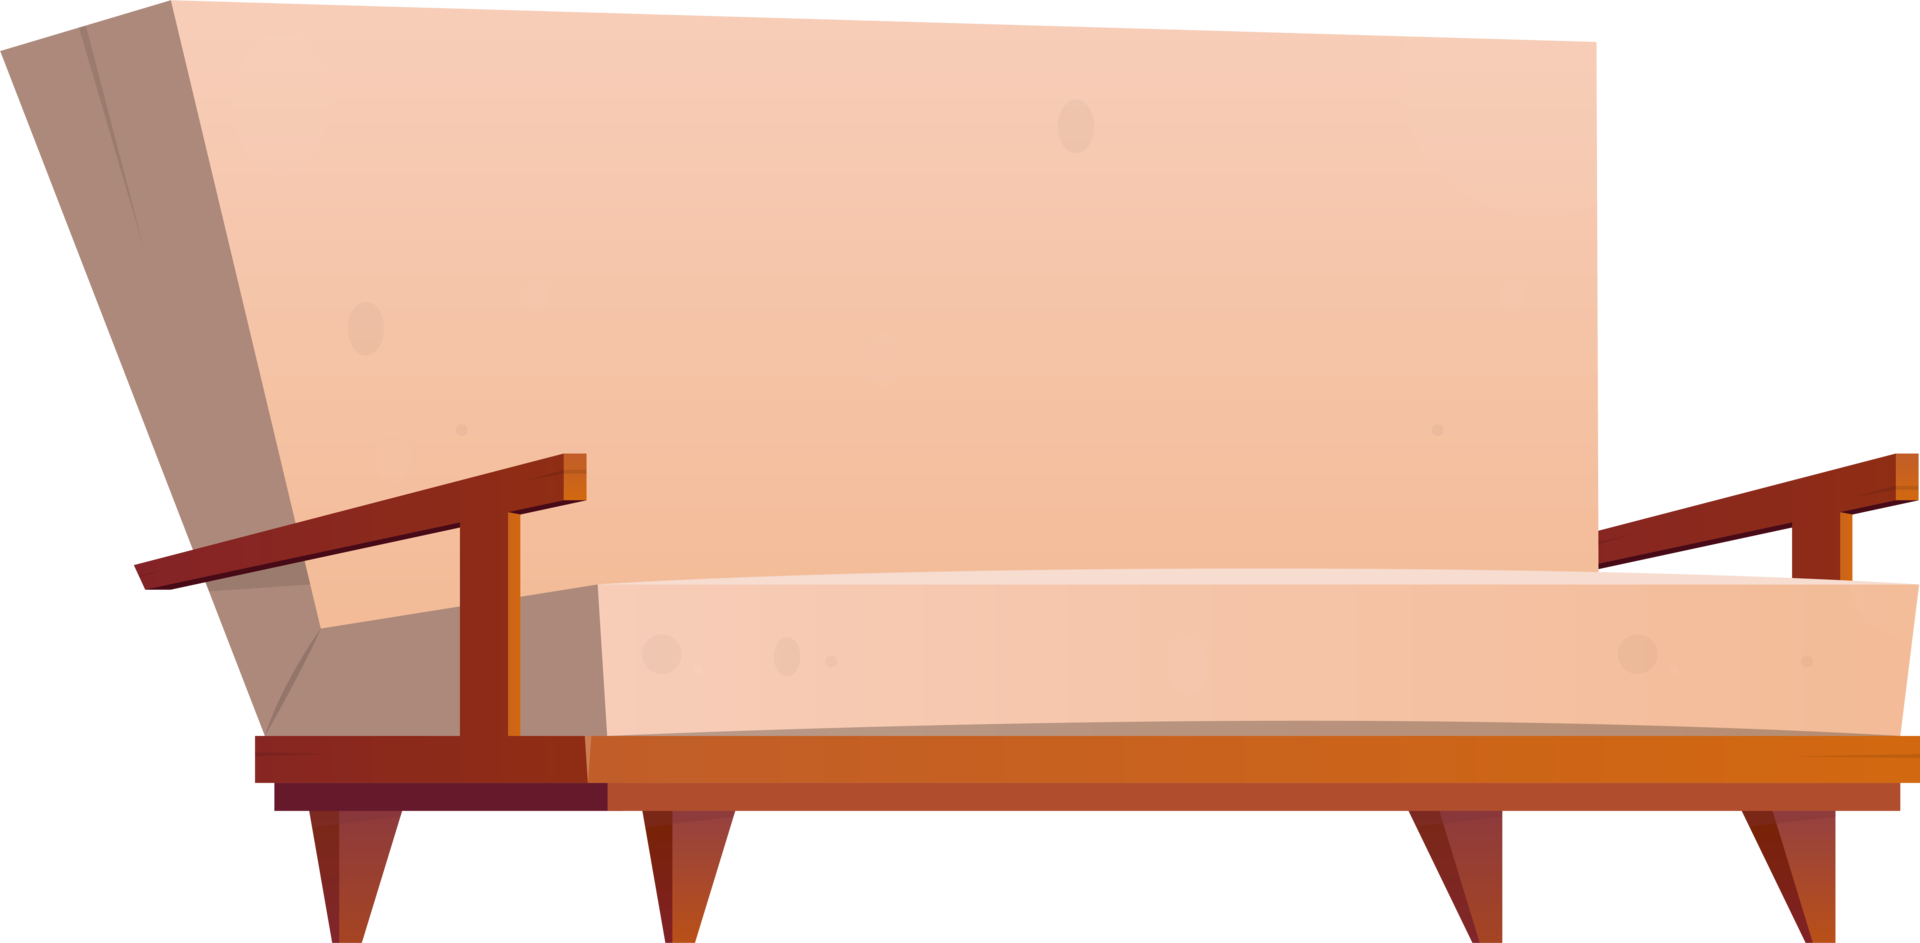 Furniture item in cartoon style png